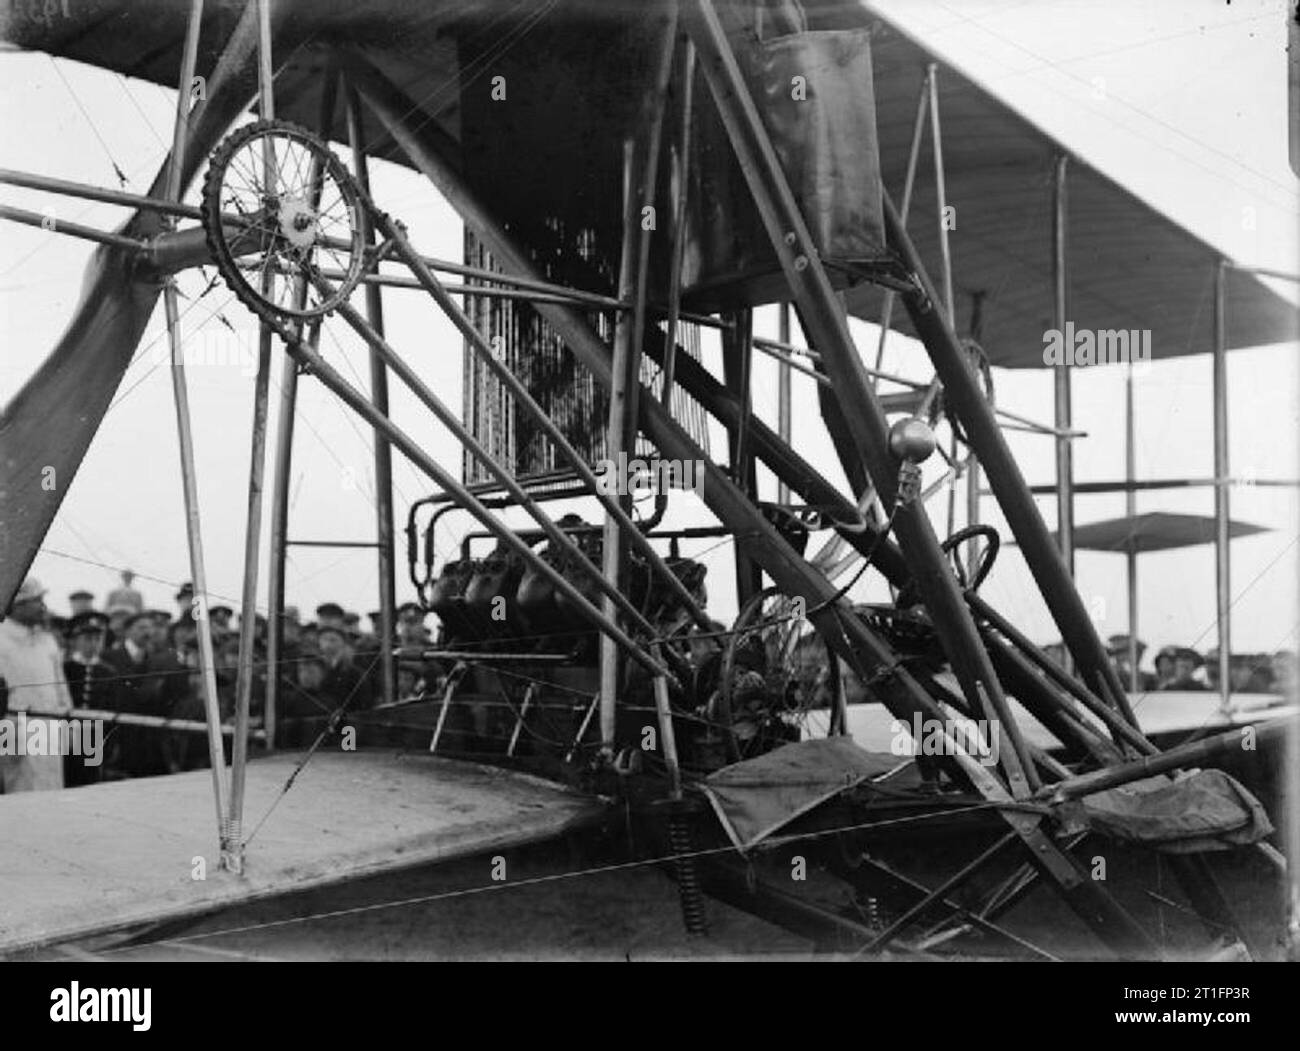 Aviation in Britain Before the First World War A good close up of the ENV engine mounted on the Cody aircraft mark IC (Cathedral - so named because of its size and the size of the hangar it required and the katahedral (lower at the wing tips) arrangement of the wings). Note the chain drive for the propellers. The most important change made with this mark was moving the pilots seat to in front of the engine. The aircraft was altered several more times, here balancing planes have been added between the wings on the rear outer struts. Particularly with his earlier aircraft Cody made constant adju Stock Photo